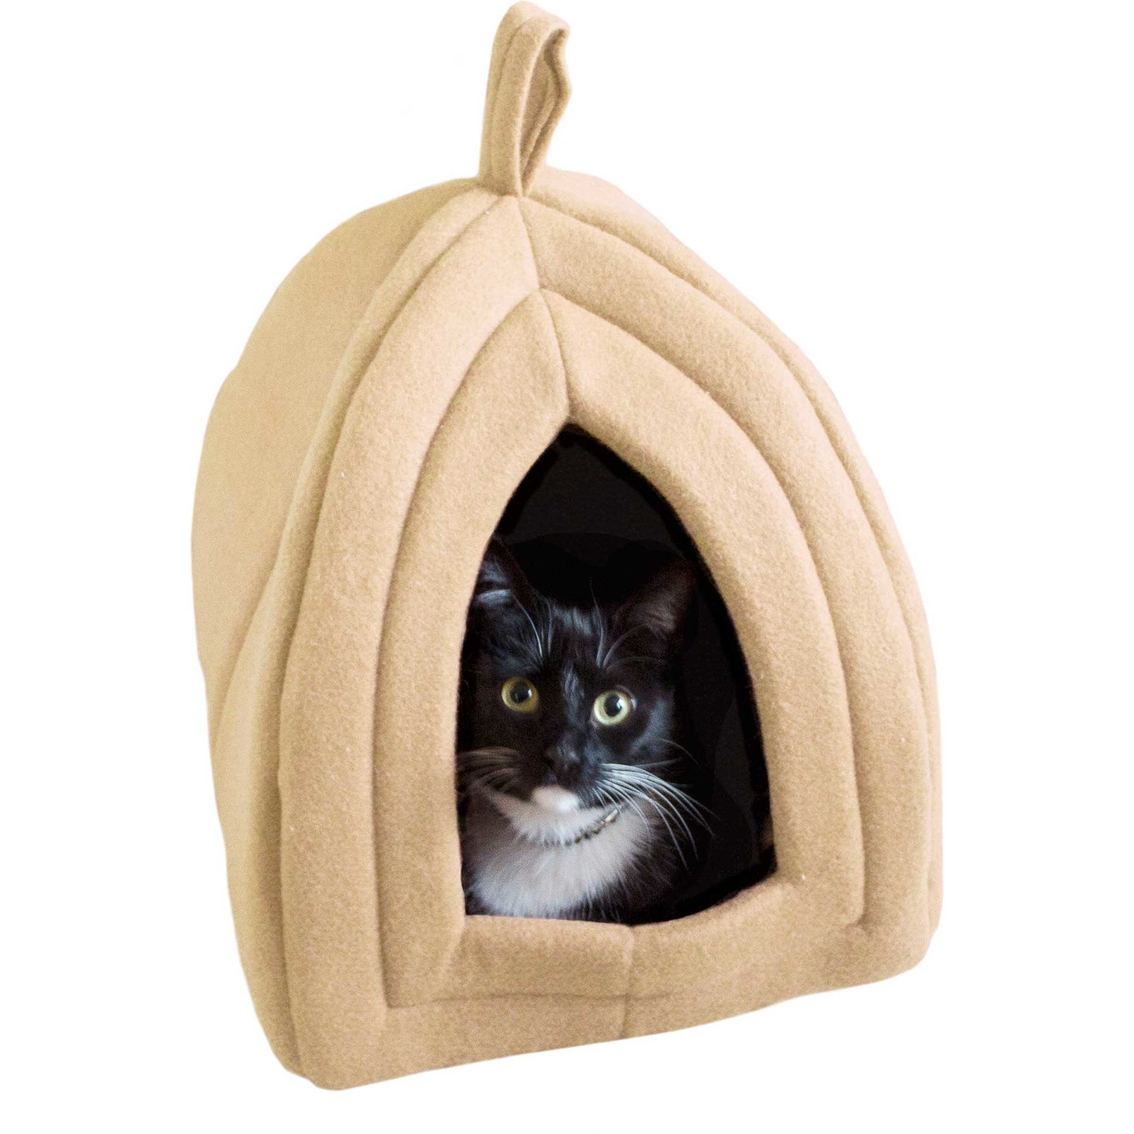 Petmaker Igloo Cat Bed with Cushion Pad - Image 2 of 3